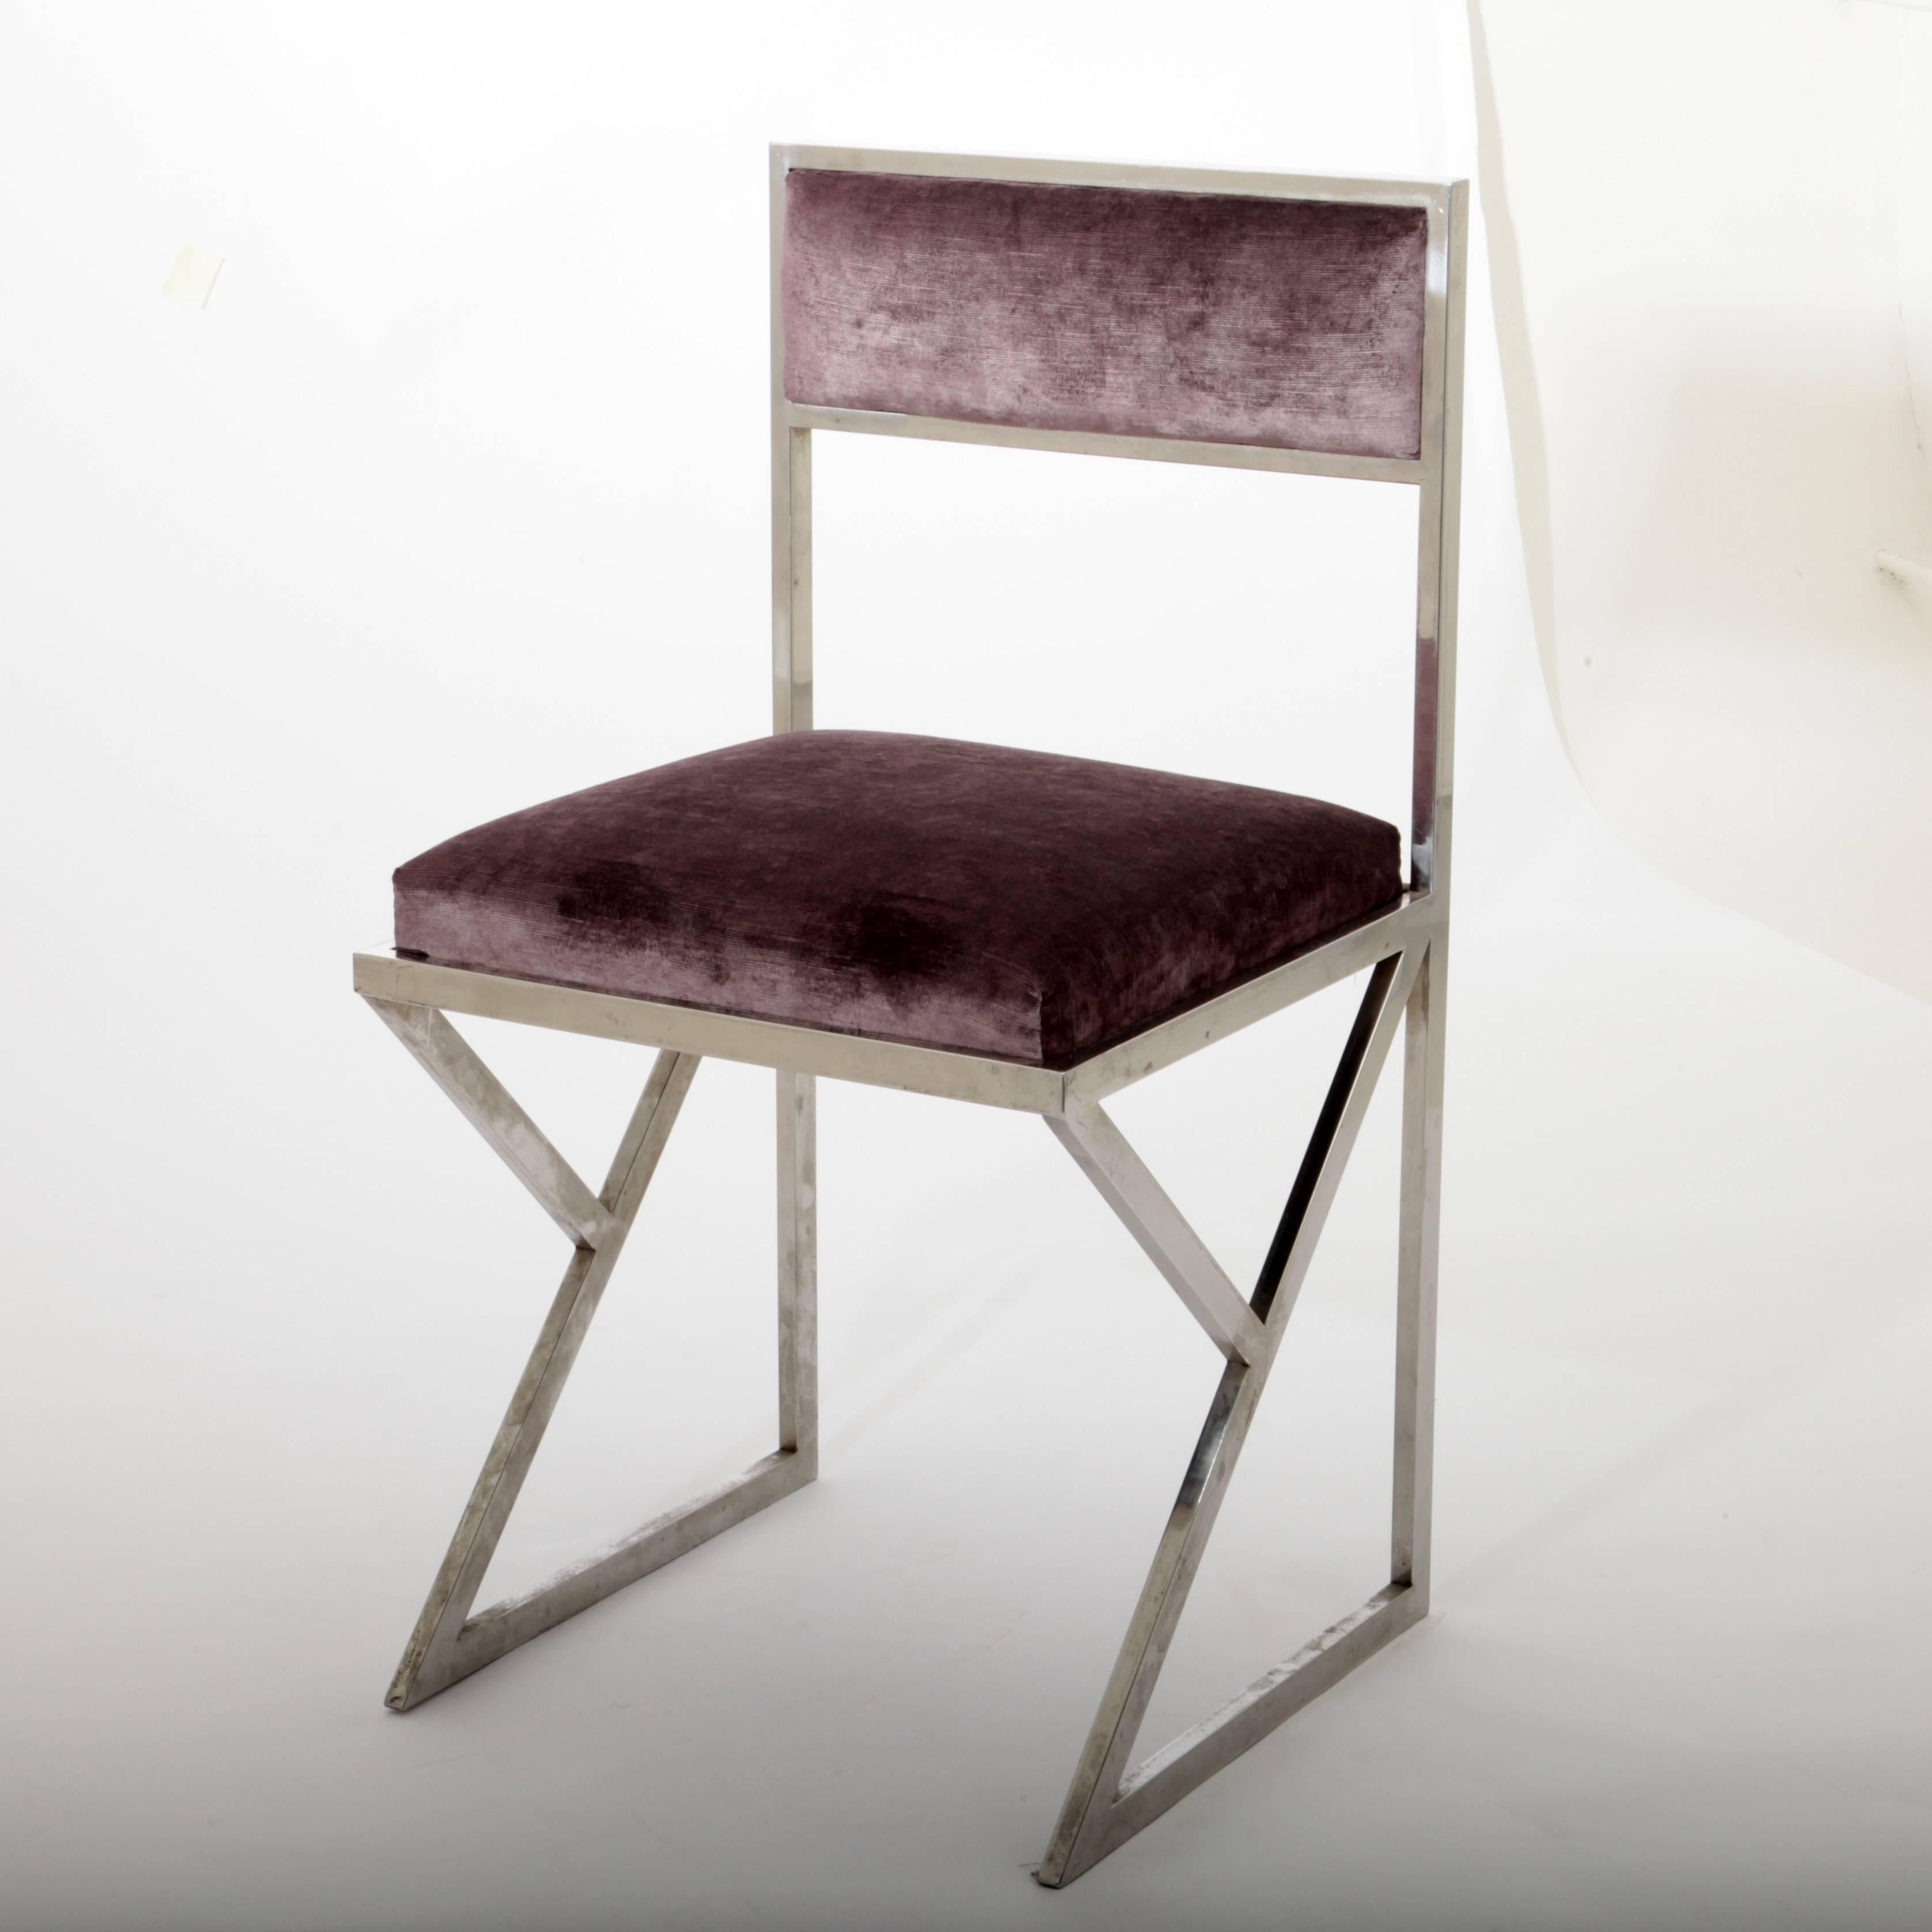 Pair of chairs with violet velvet upholstery and chromed legs.